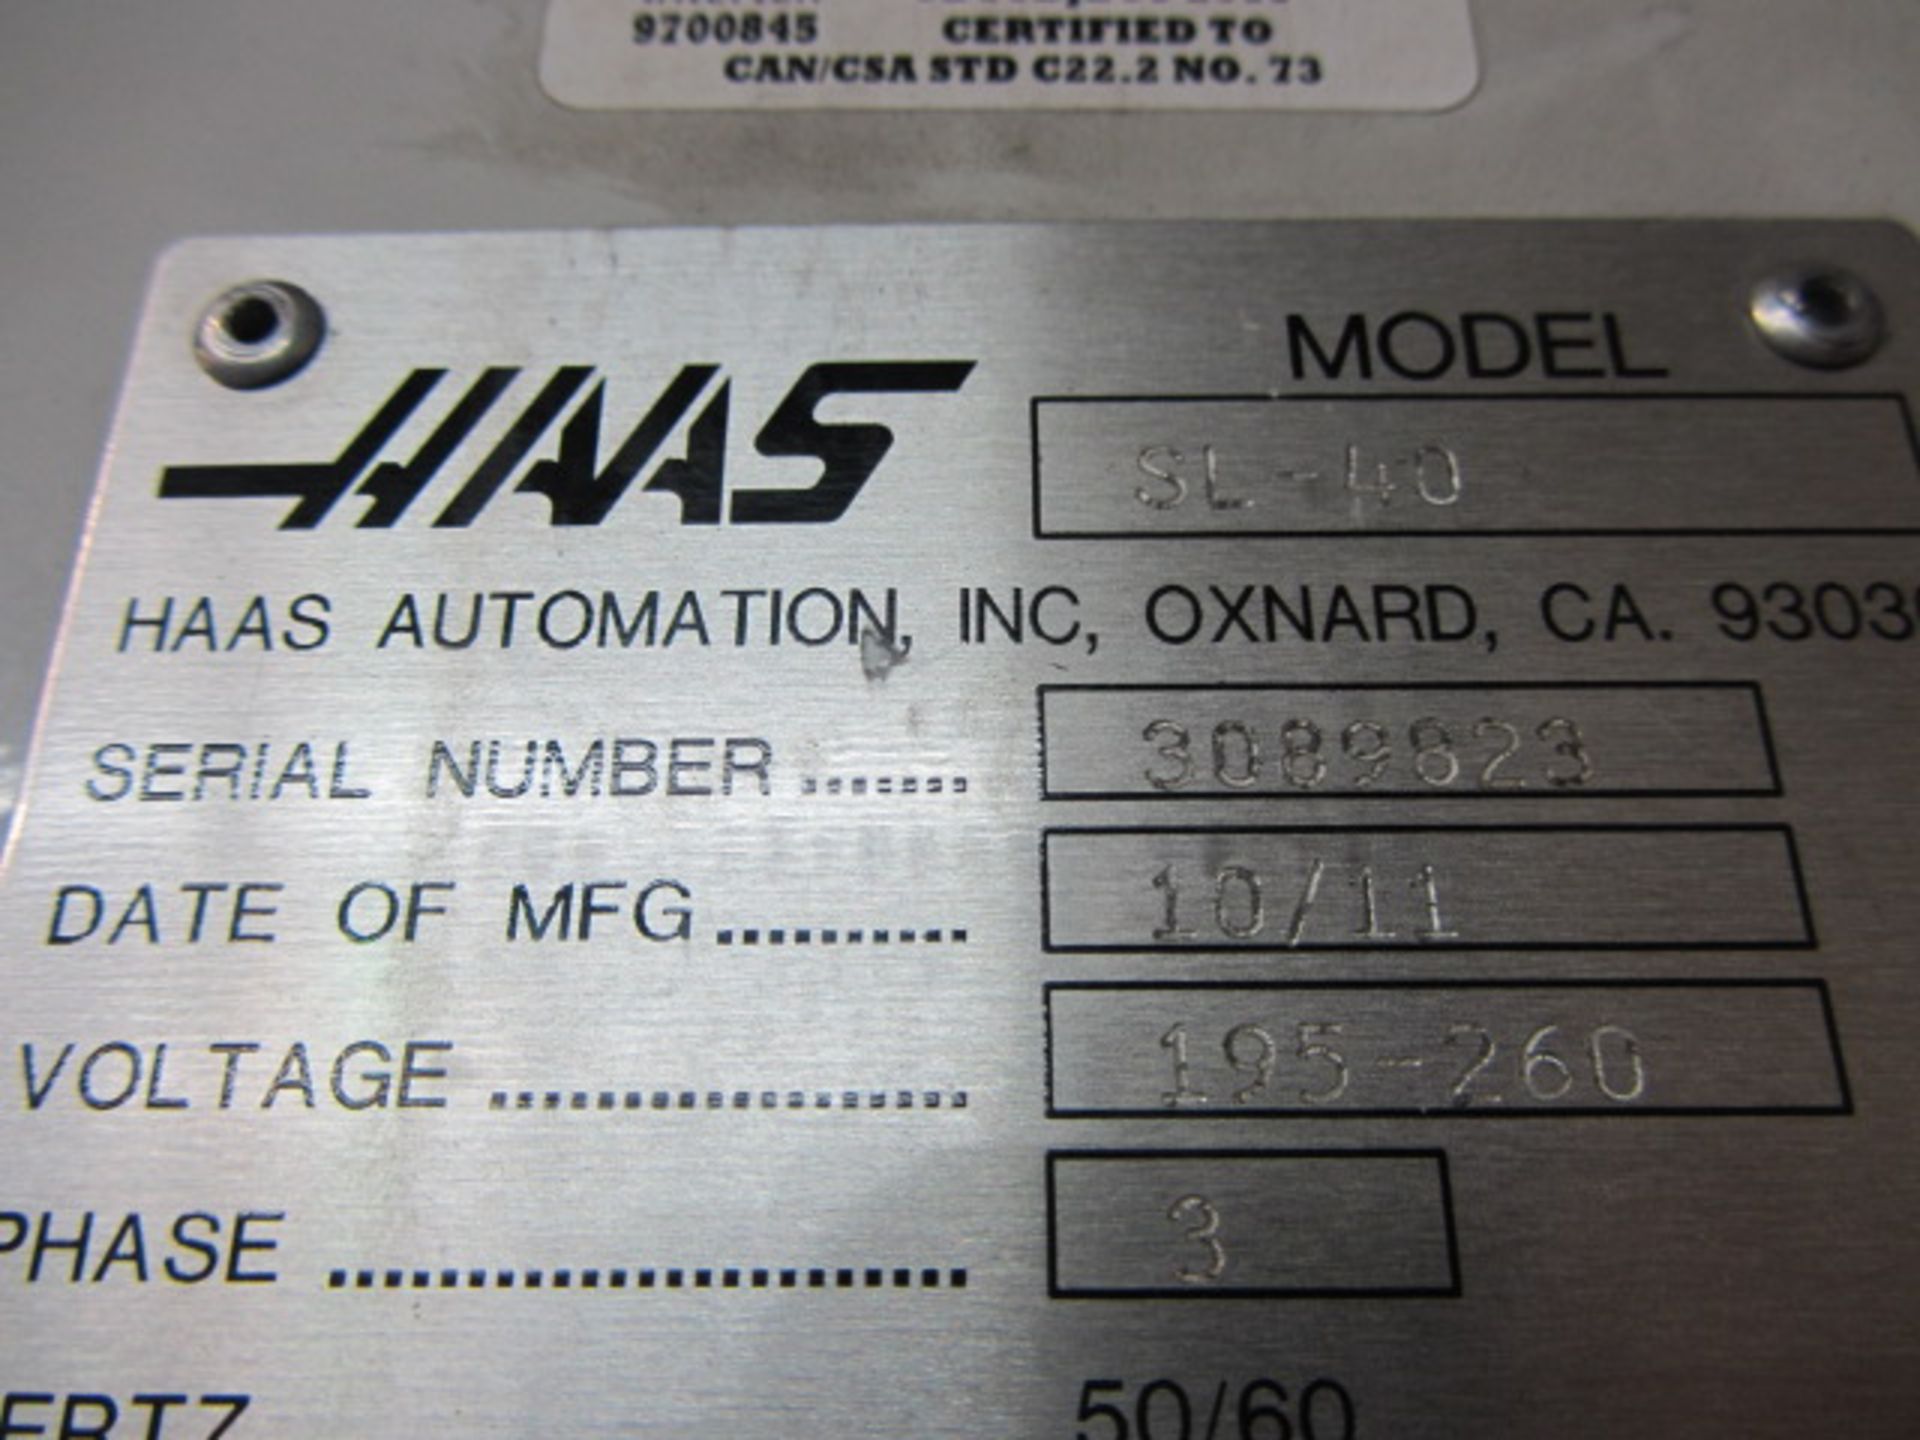 Haas SL40 CNC Turning Center with 15'' 3-Jaw Power Chuck, 4-1/2'' Bore, Approx 70'' Max Distance - Image 10 of 10